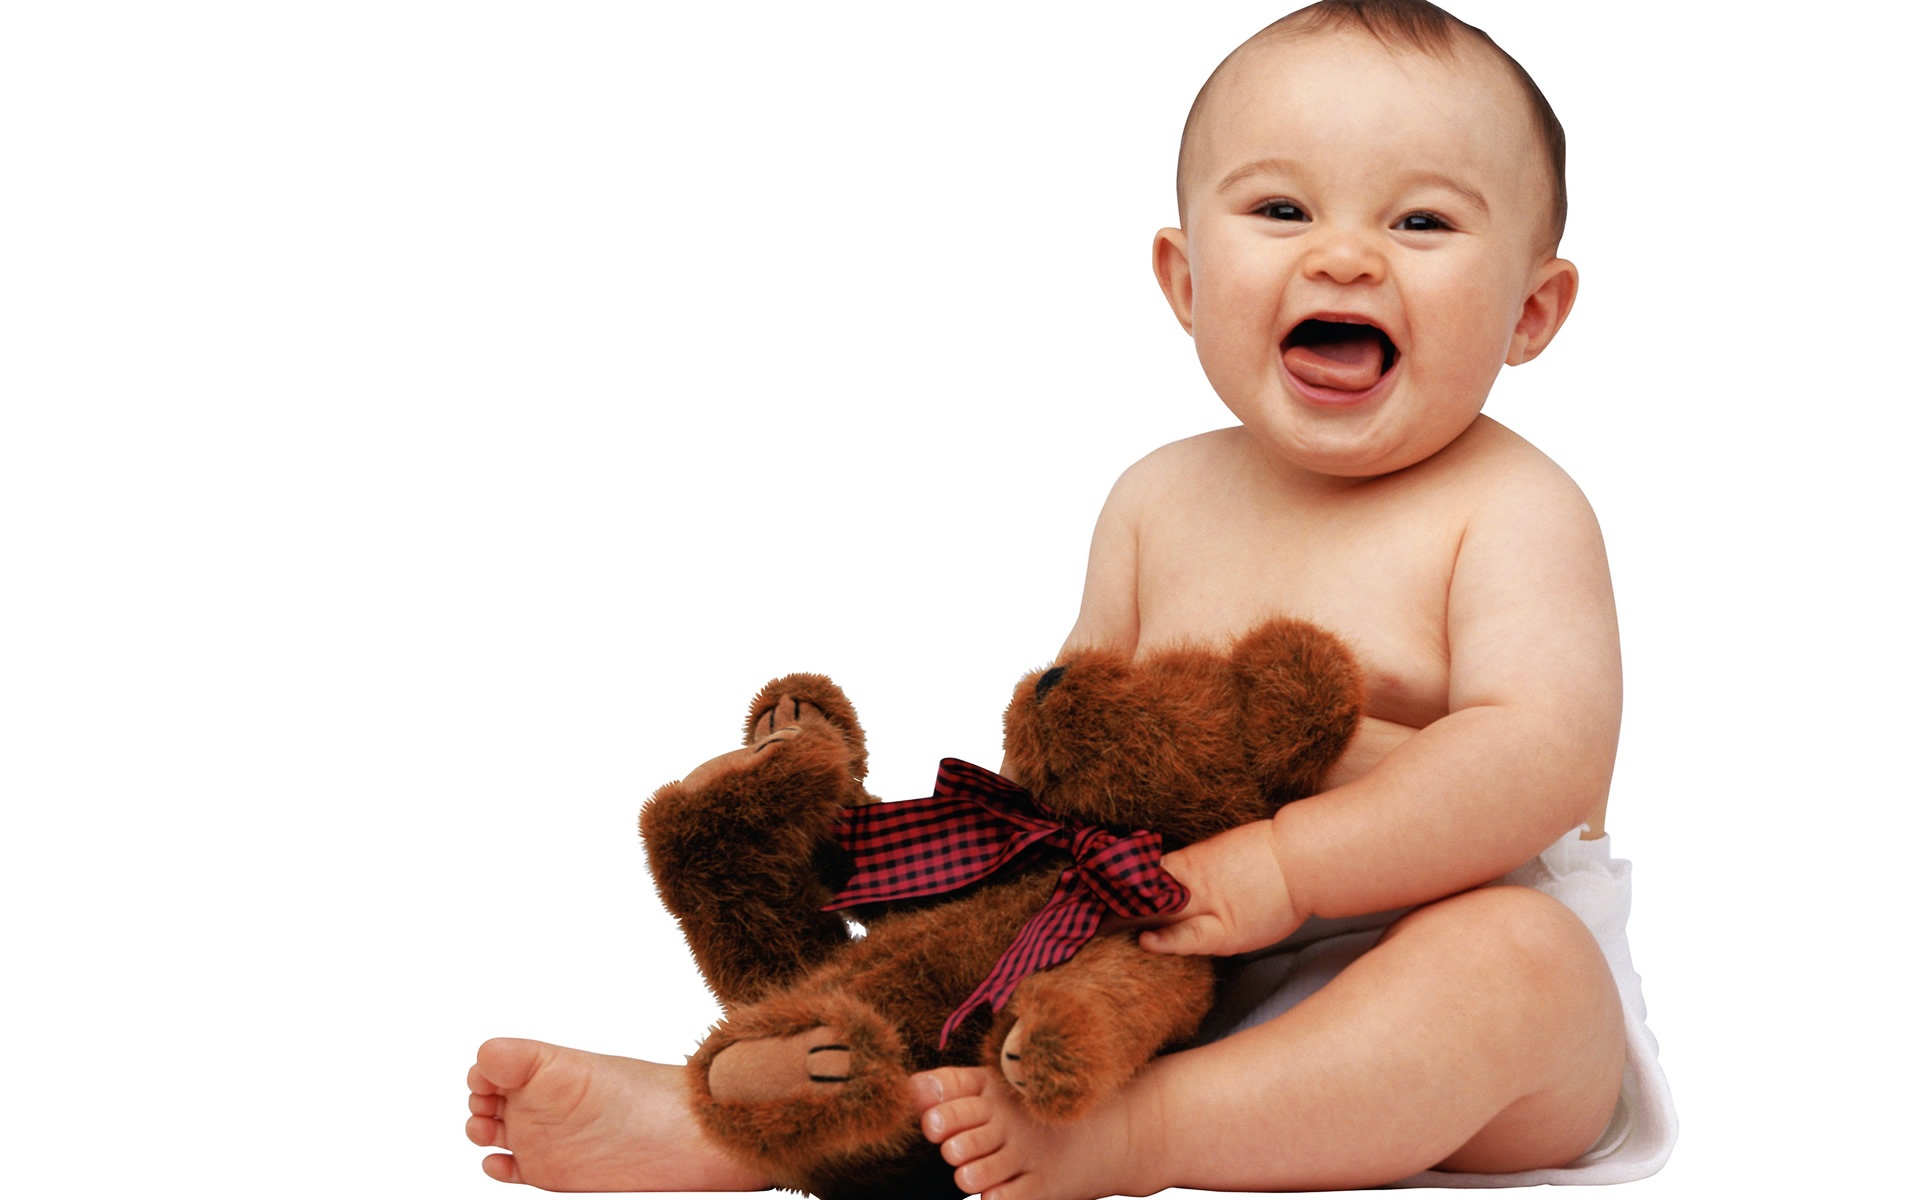 Wallpaper Of Baby A Cute Holding Teddy Bear